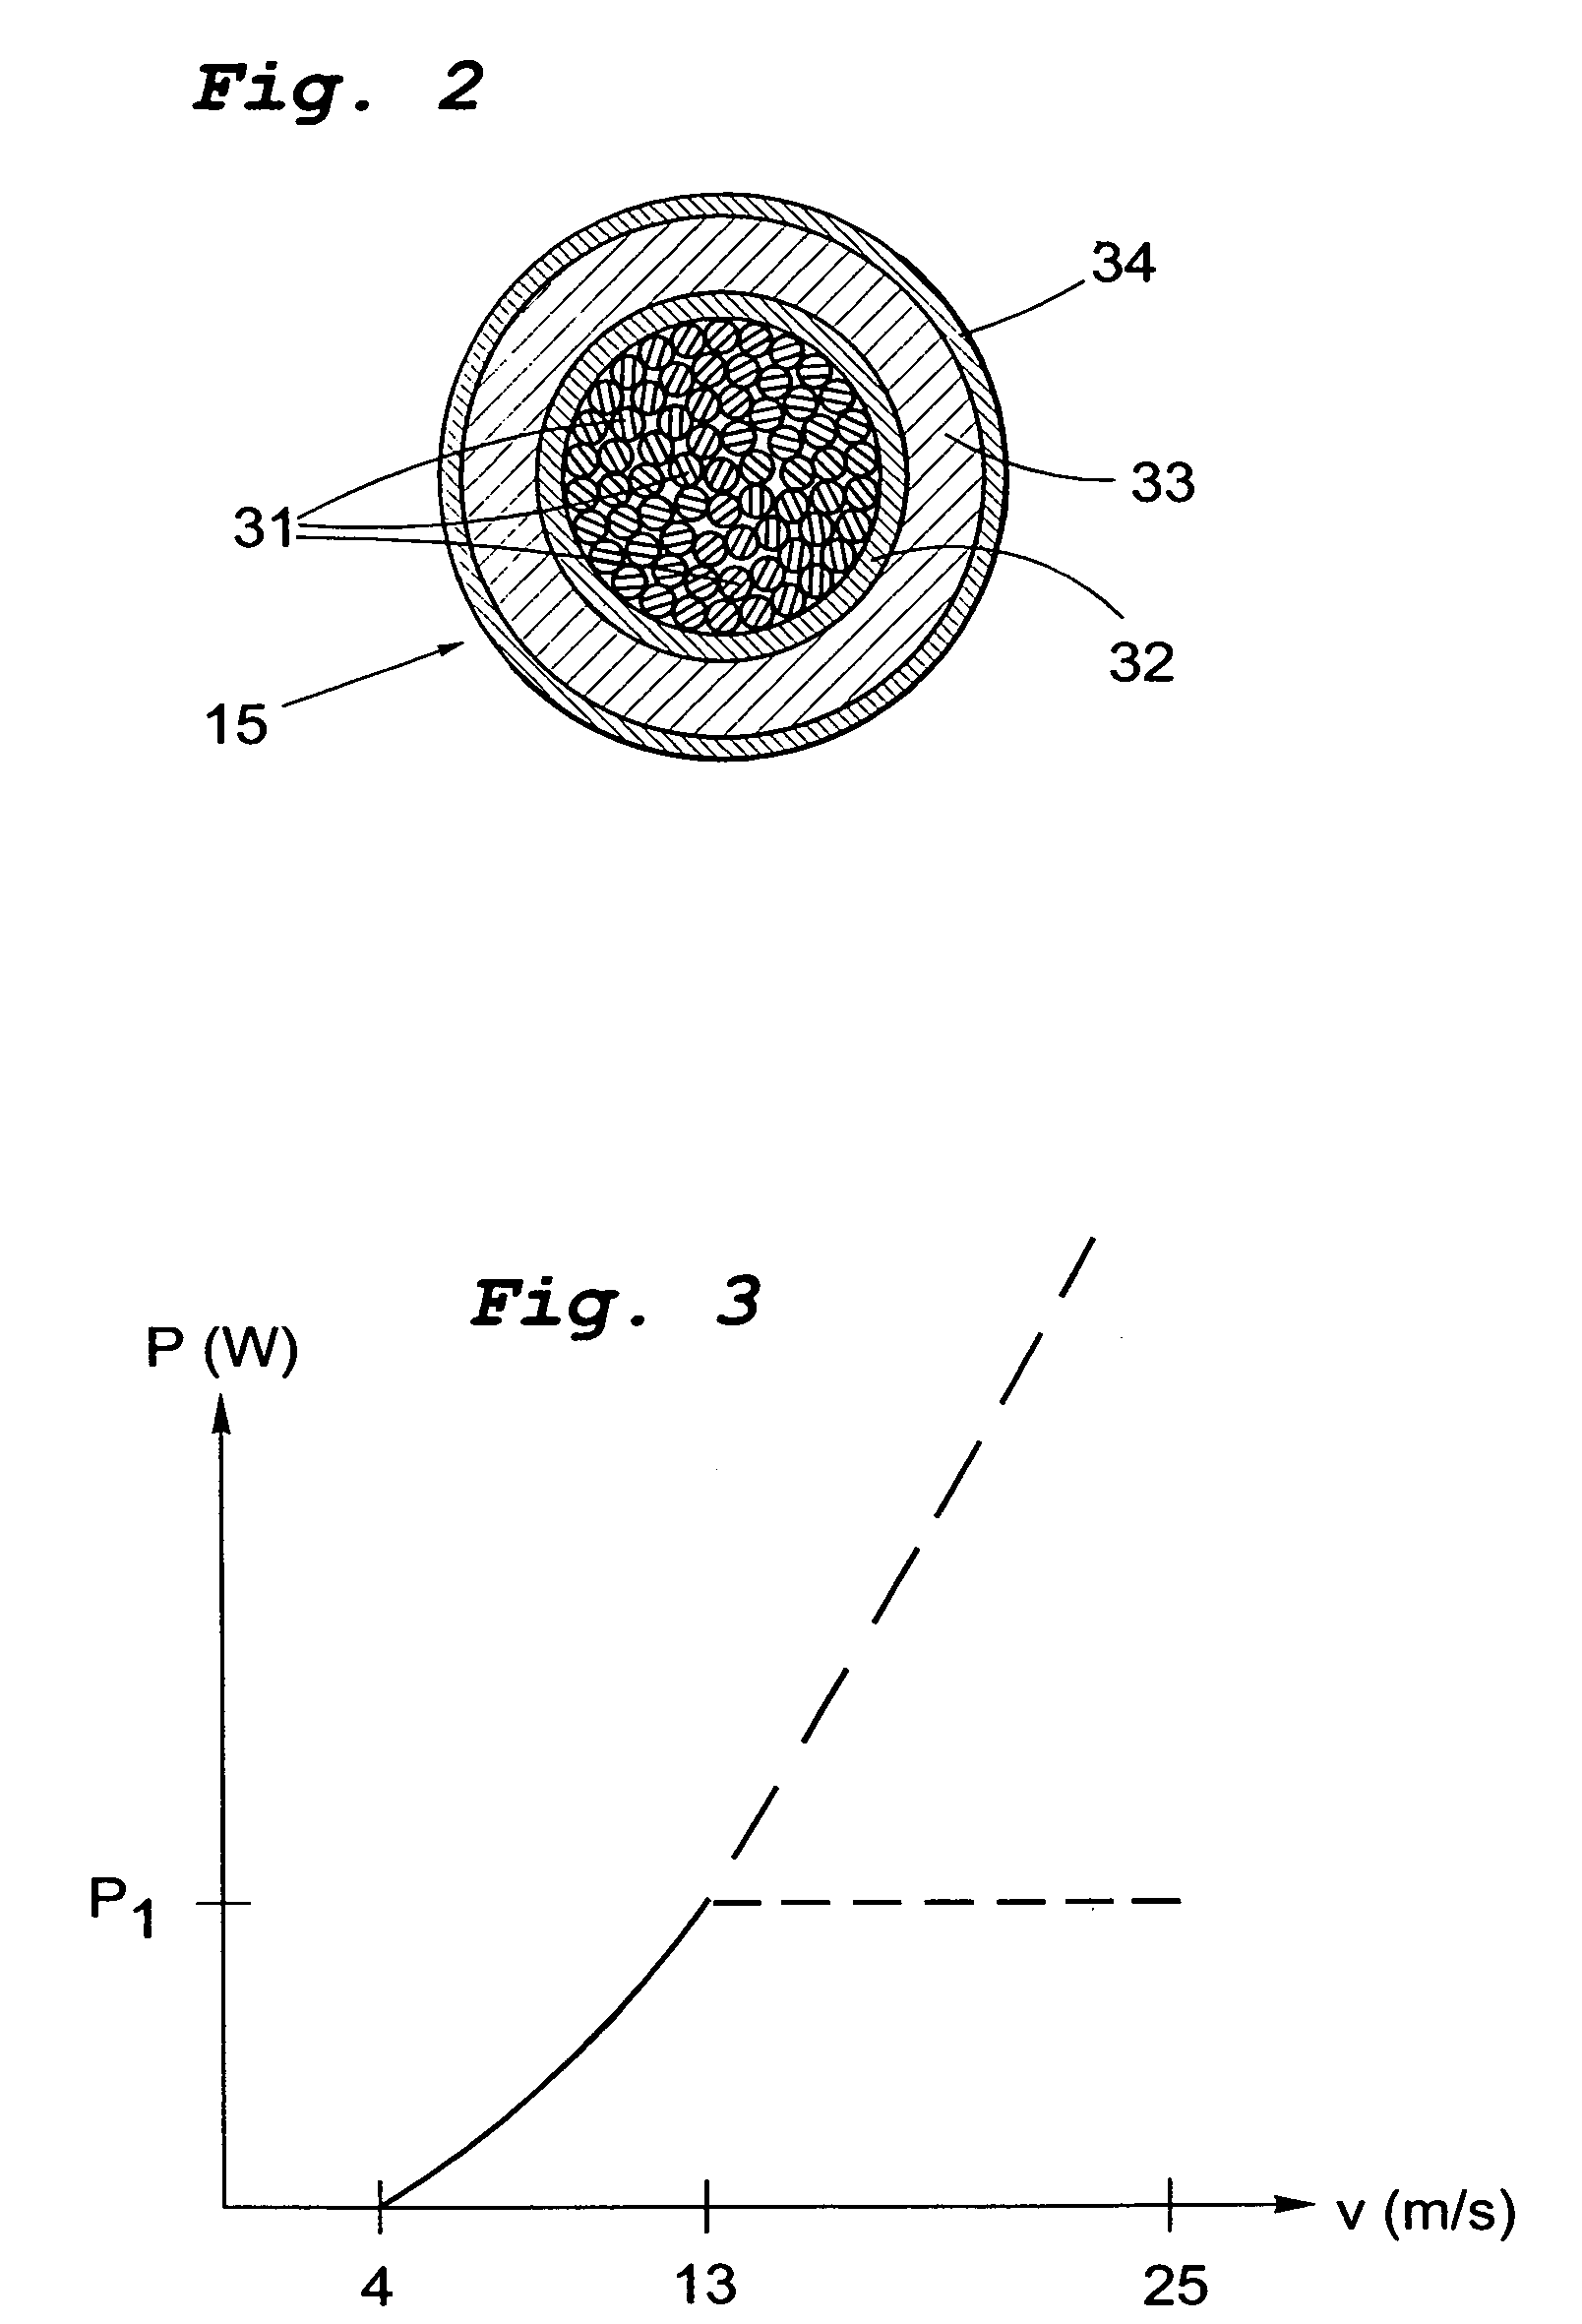 Wind power electric device and method